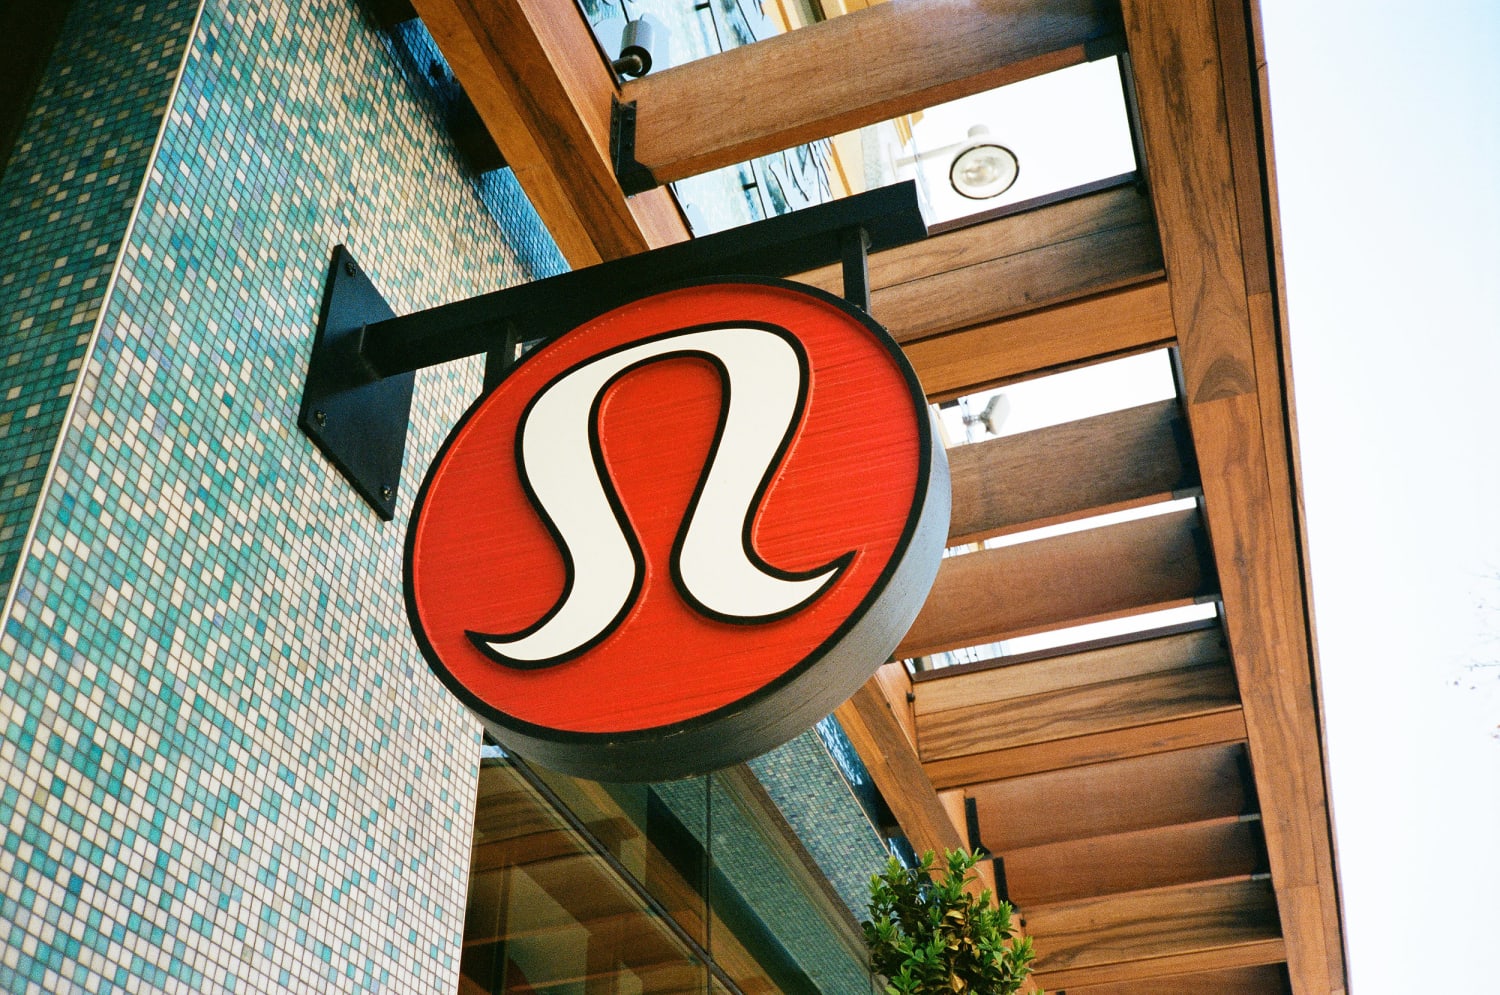 Lululemon Staffer Says Manager Asked Why She Couldn't Say 'Colored